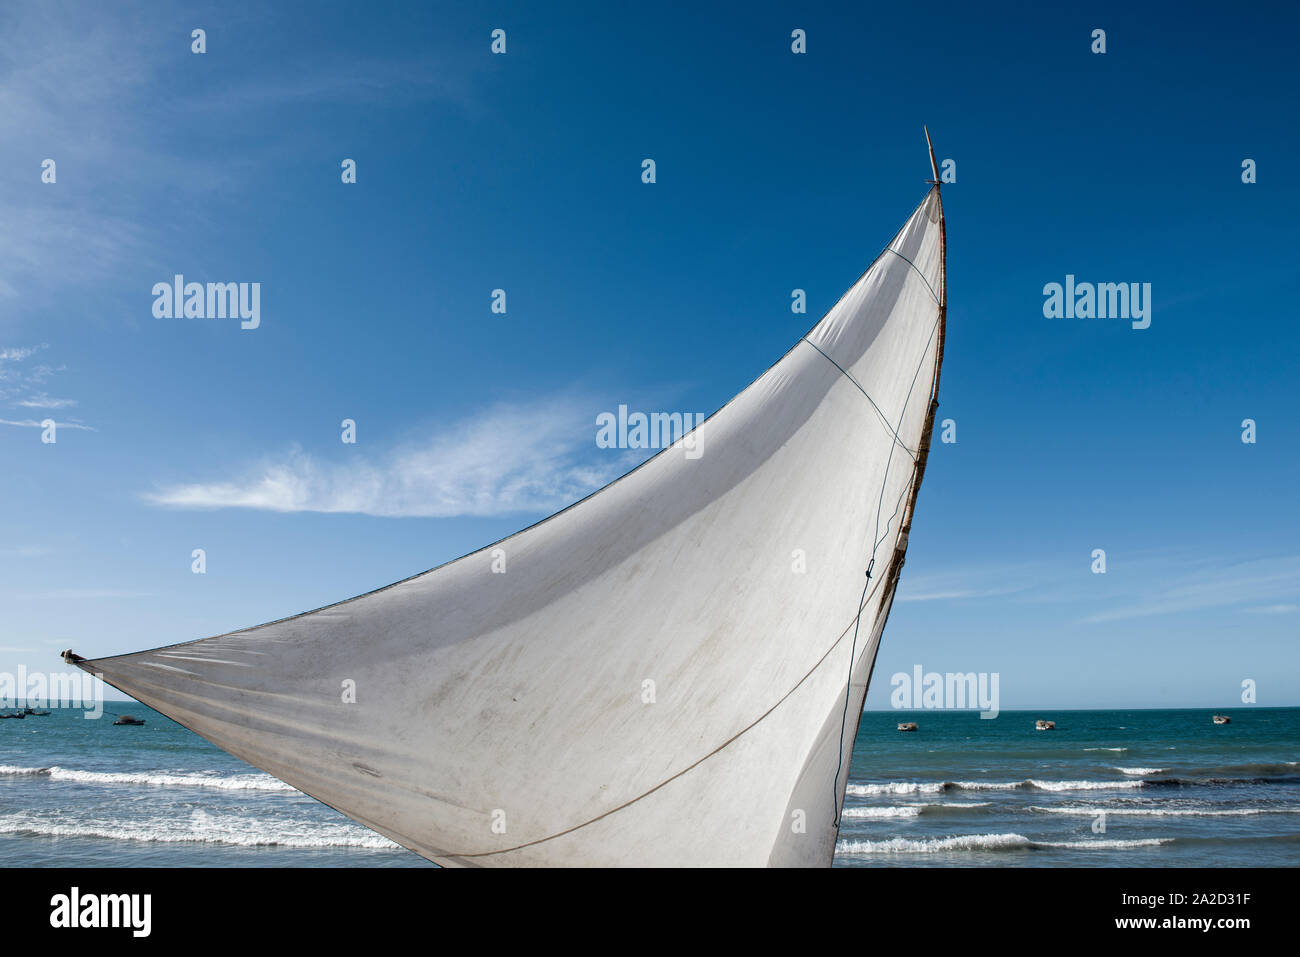 Raft sail in blue sea and sky background Stock Photo